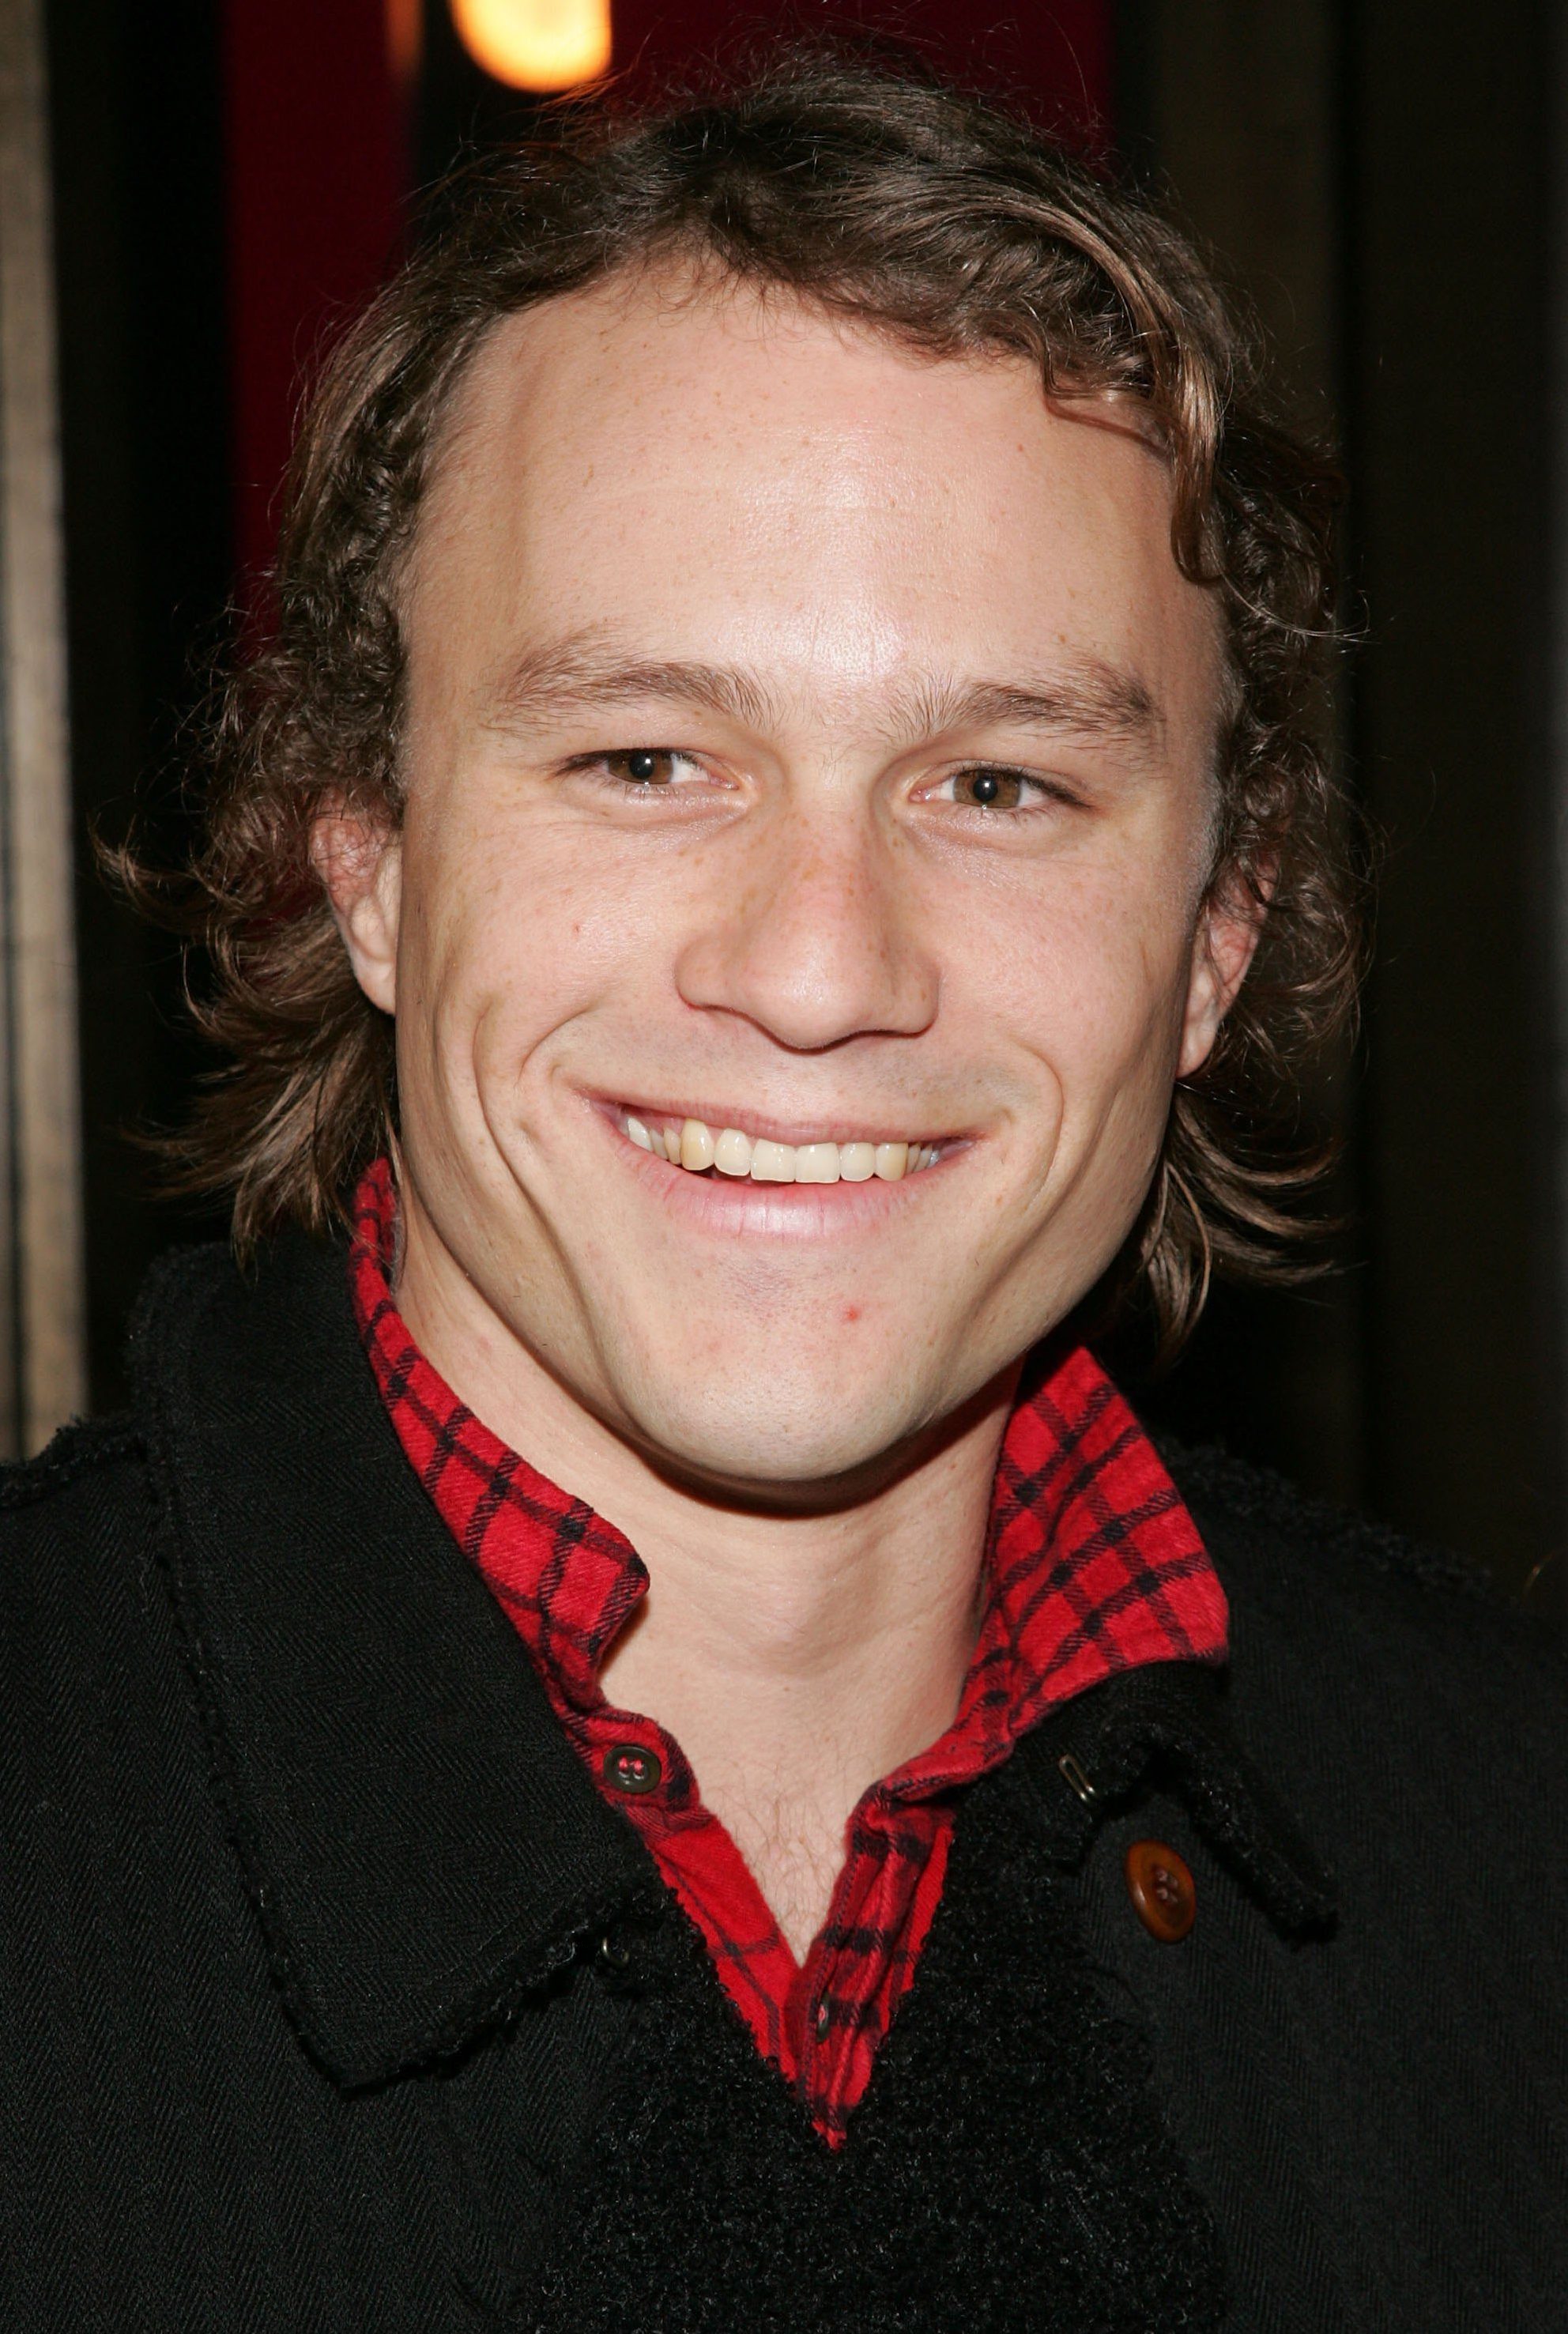 How old is Heath Ledger?